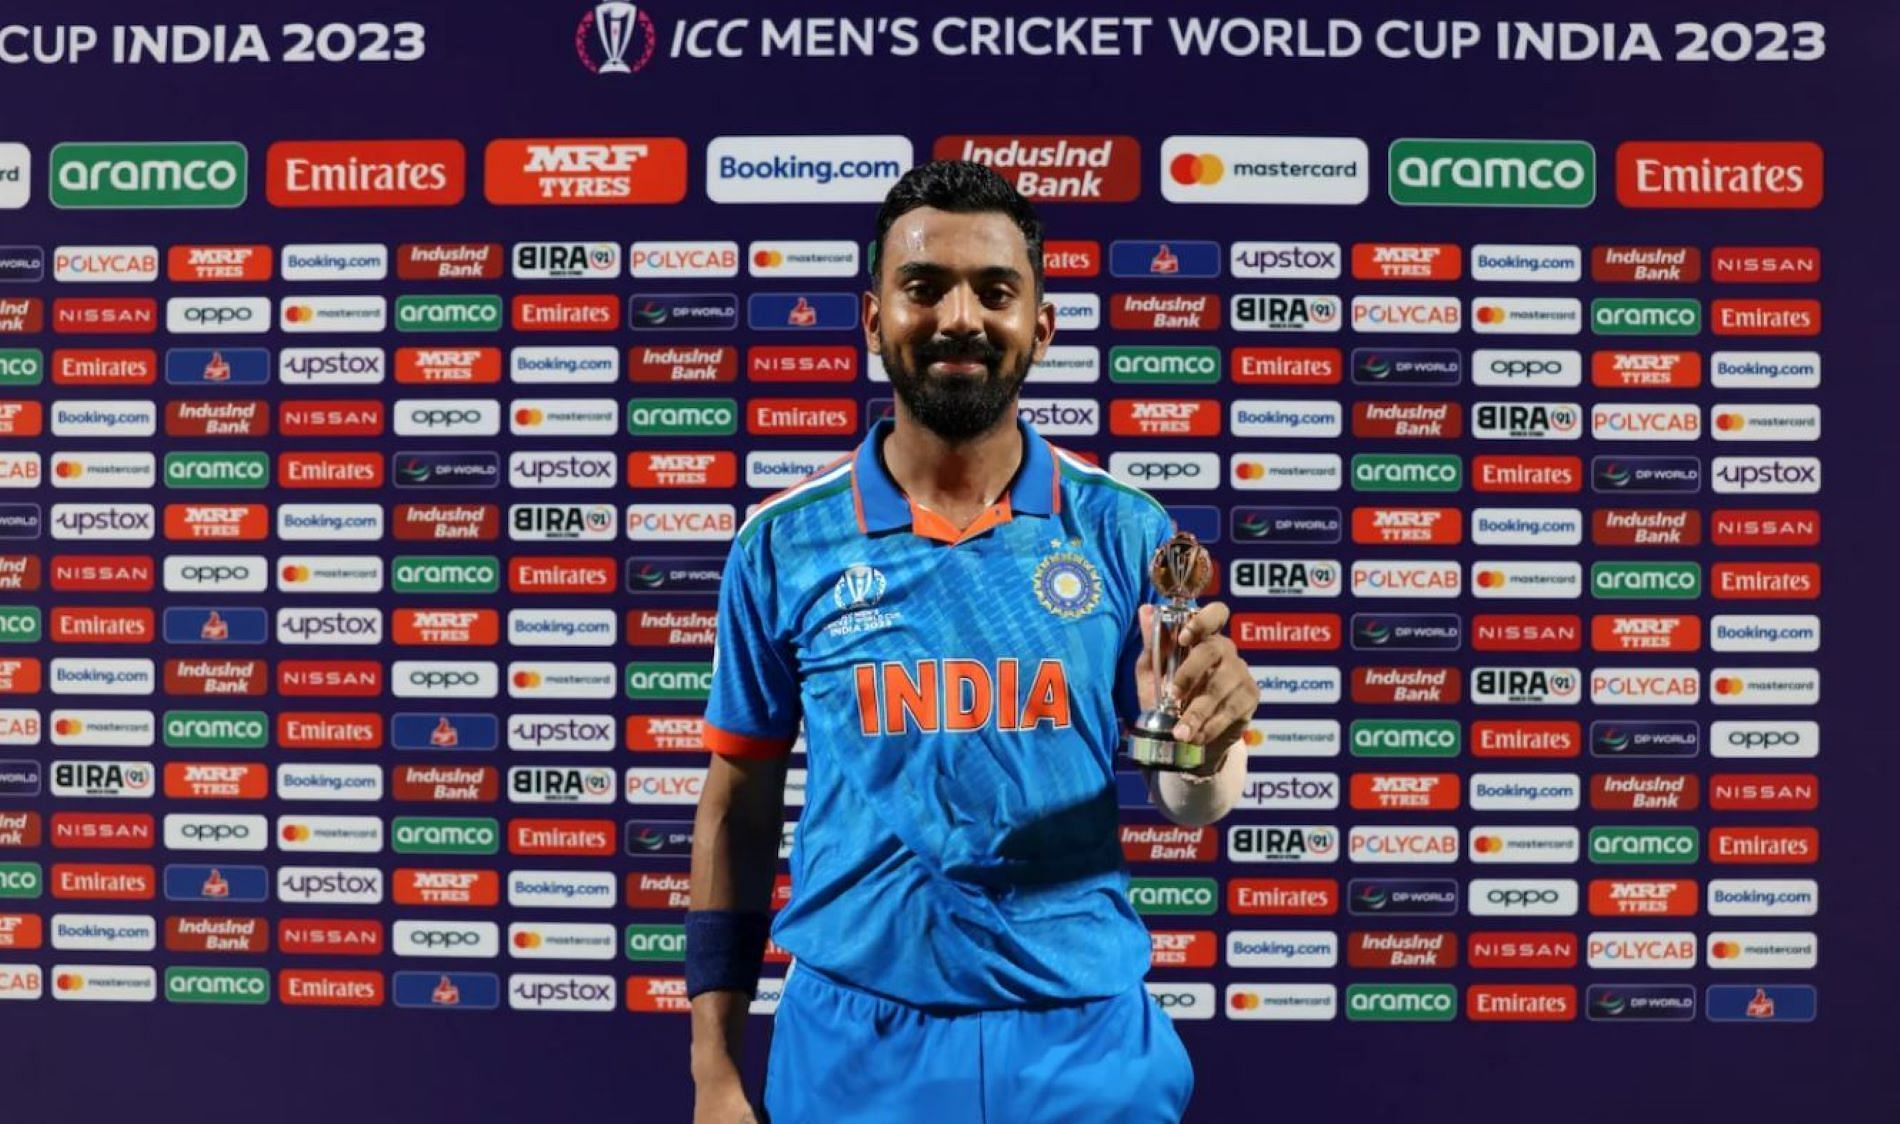 KL Rahul was the Player of the Match for his match-winning 97 against Australia.